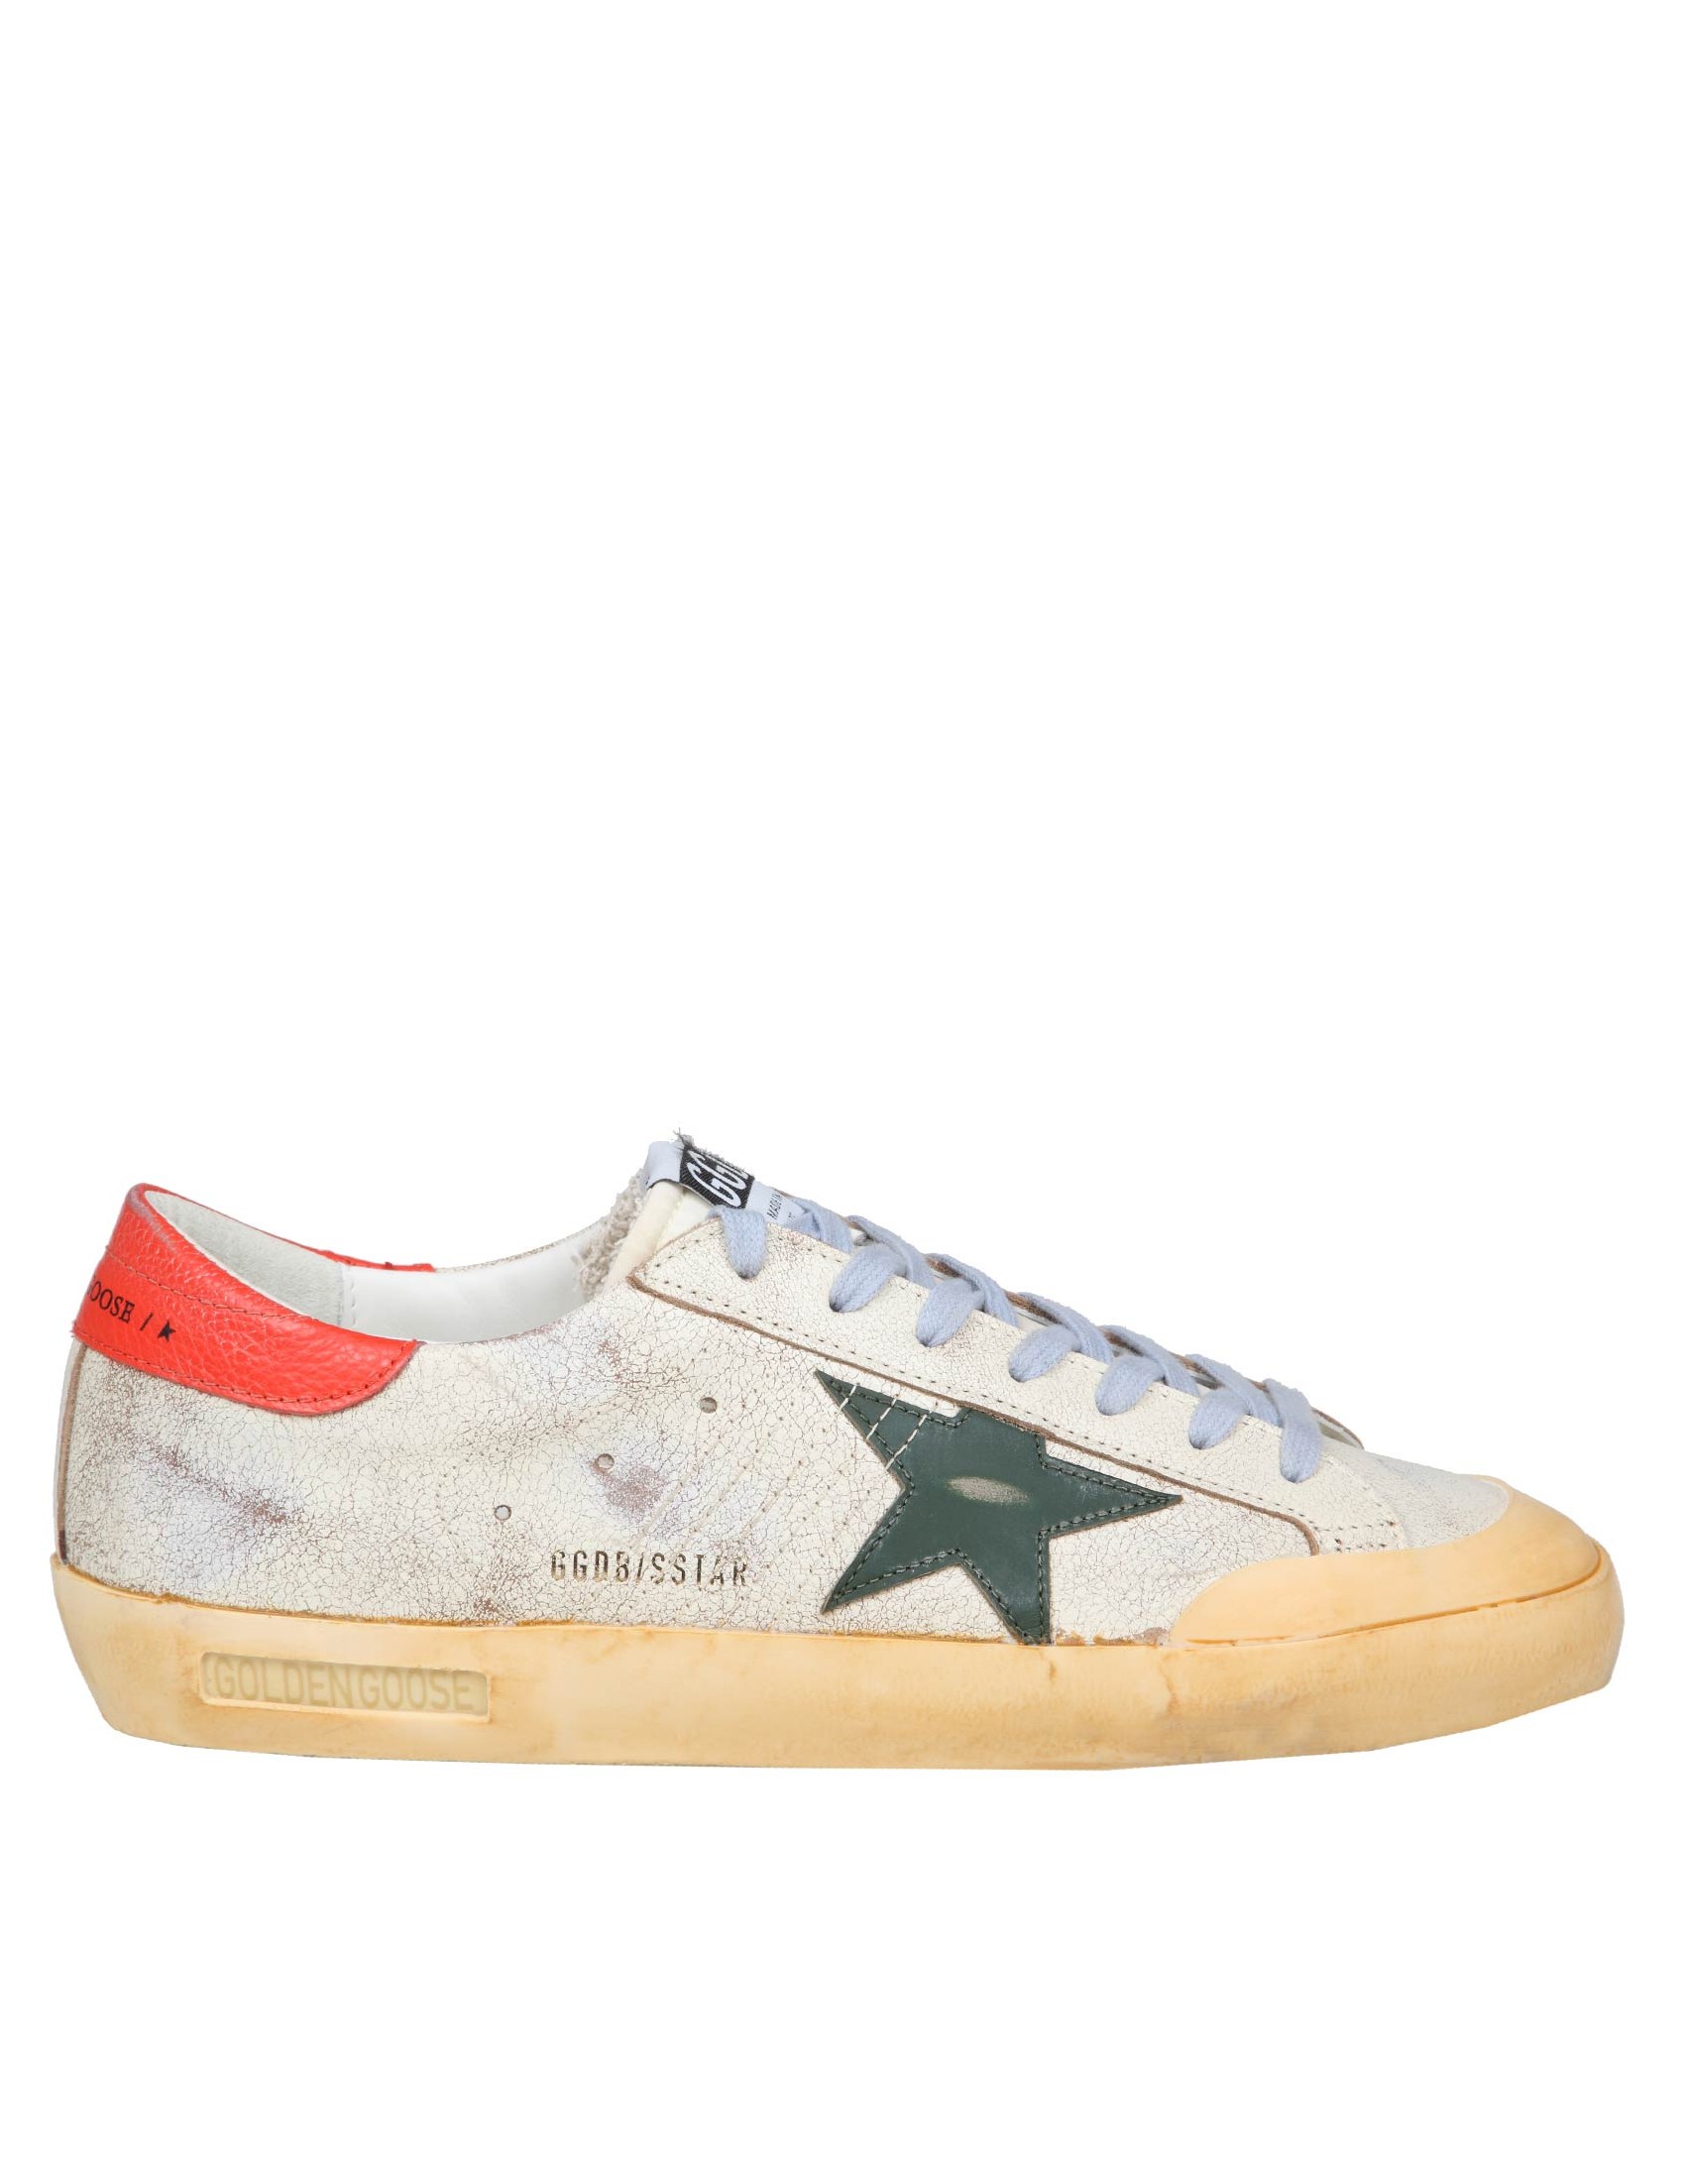 GOLDEN GOOSE SUPERSTAR IN WHITE AND GREEN LEATHER